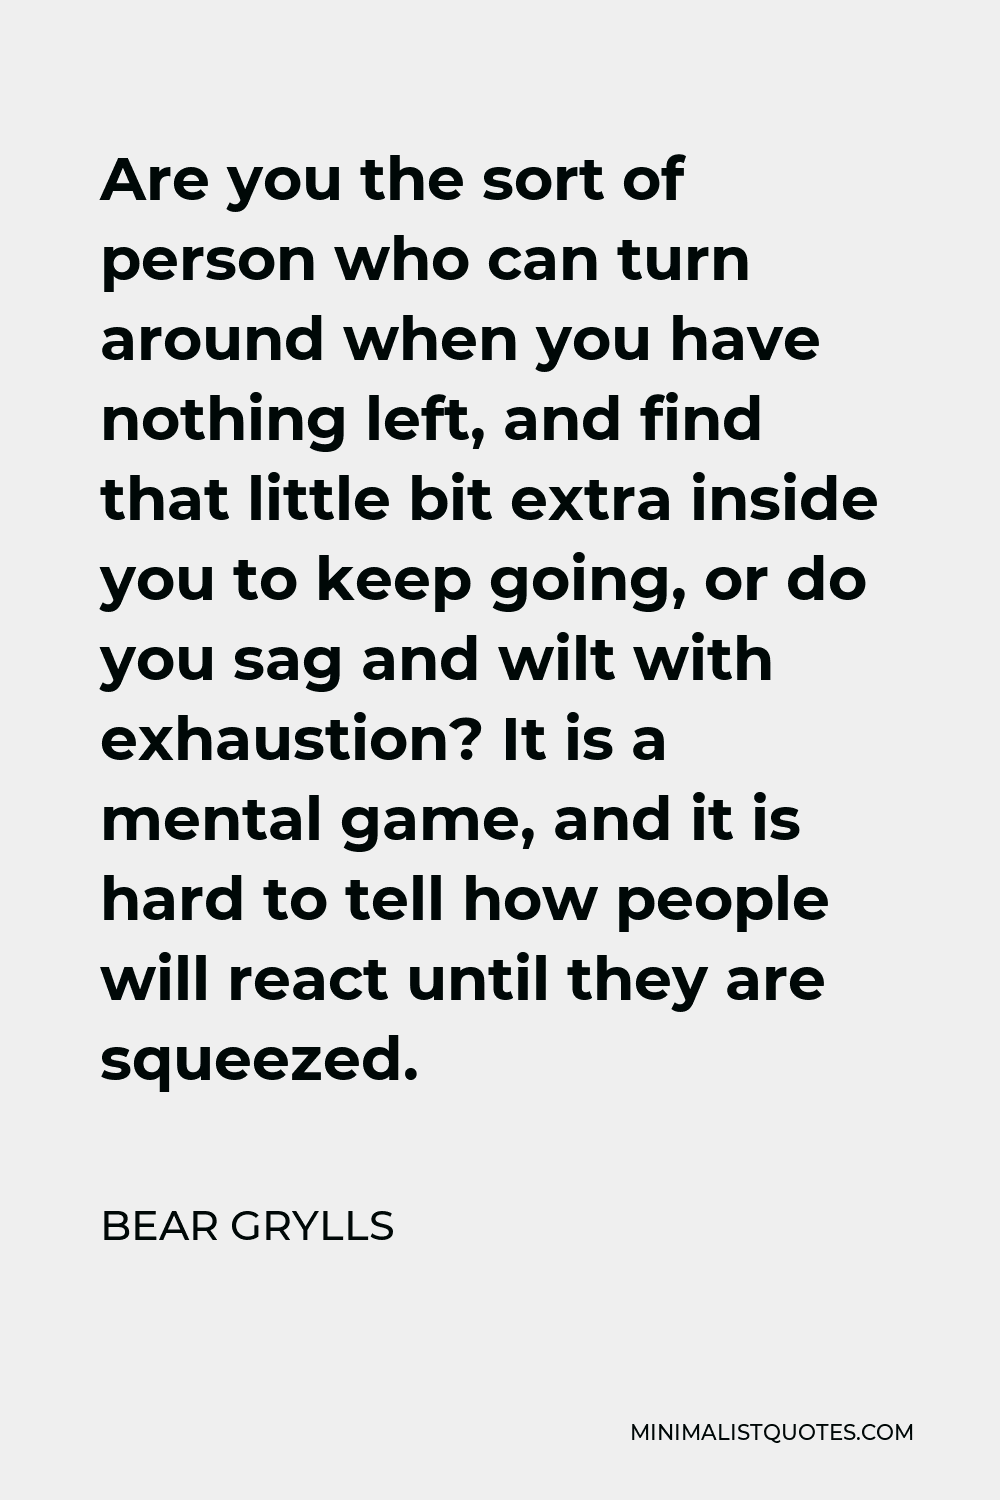 Bear Grylls Quote - Are you the sort of person who can turn around when you have nothing left, and find that little bit extra inside you to keep going, or do you sag and wilt with exhaustion? It is a mental game, and it is hard to tell how people will react until they are squeezed.